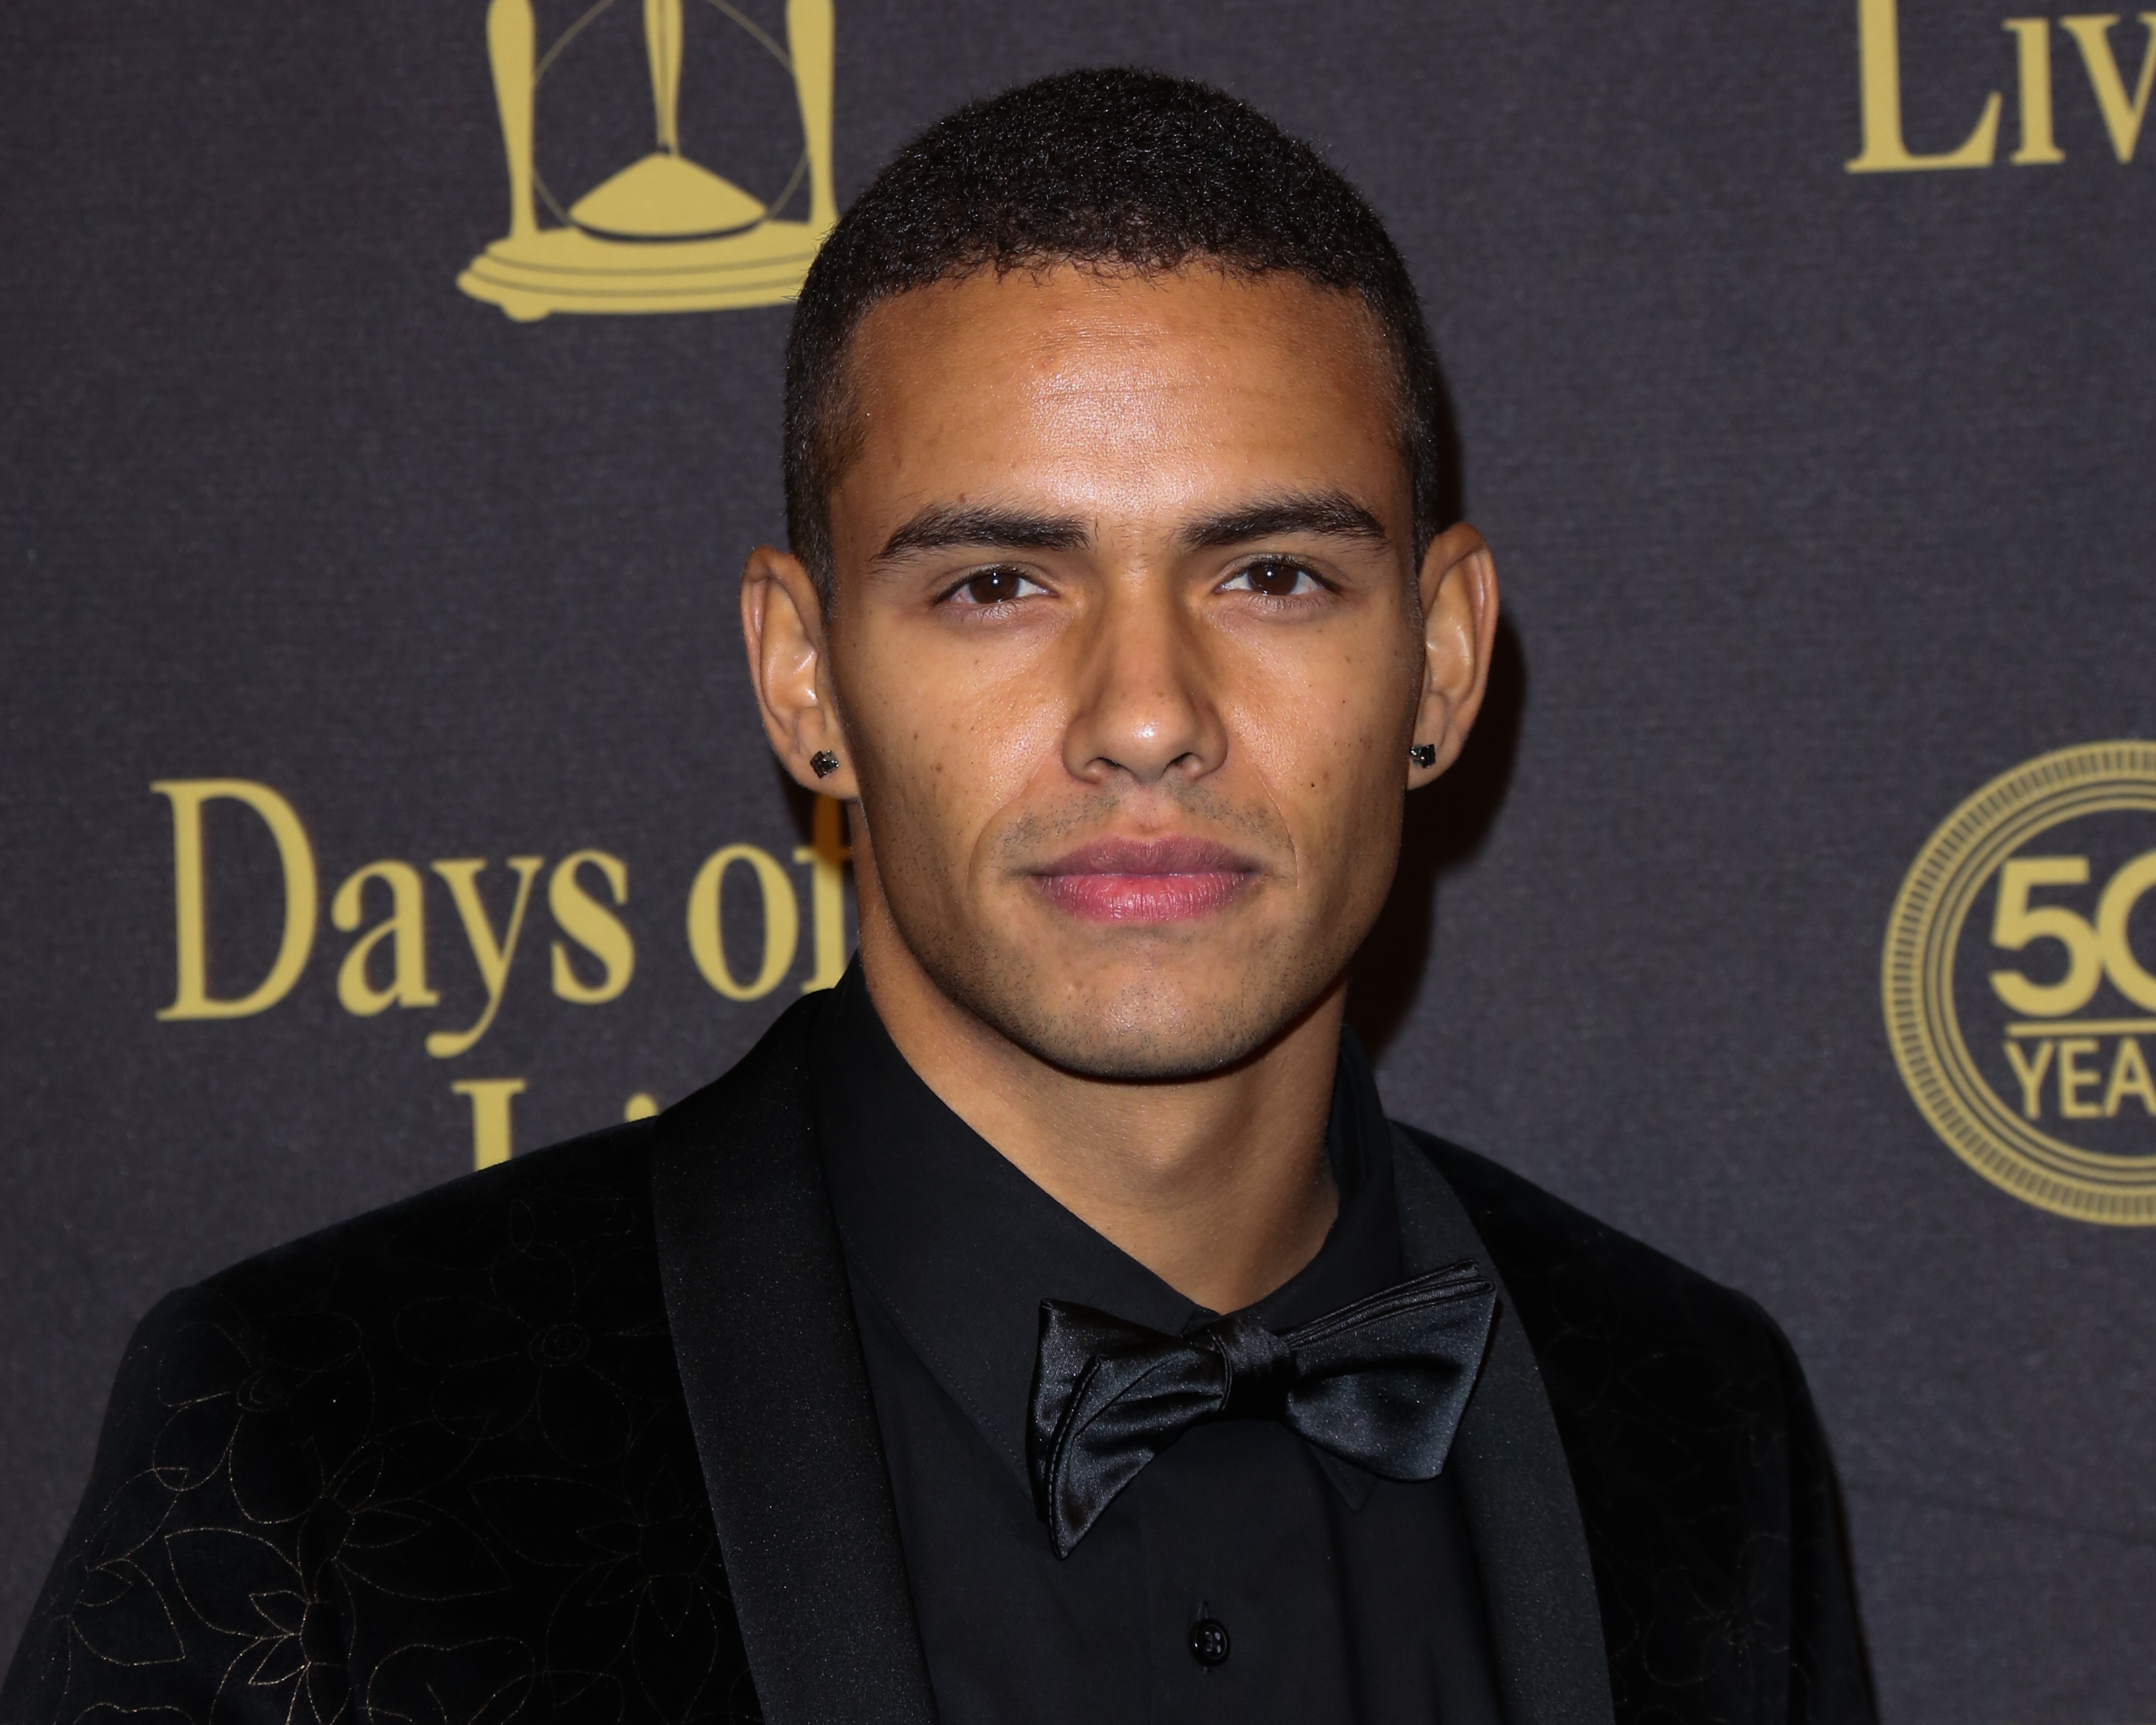 Days of Our Lives comings and goings focuses on Kyler Pettis, pictured here in a black tuxedo